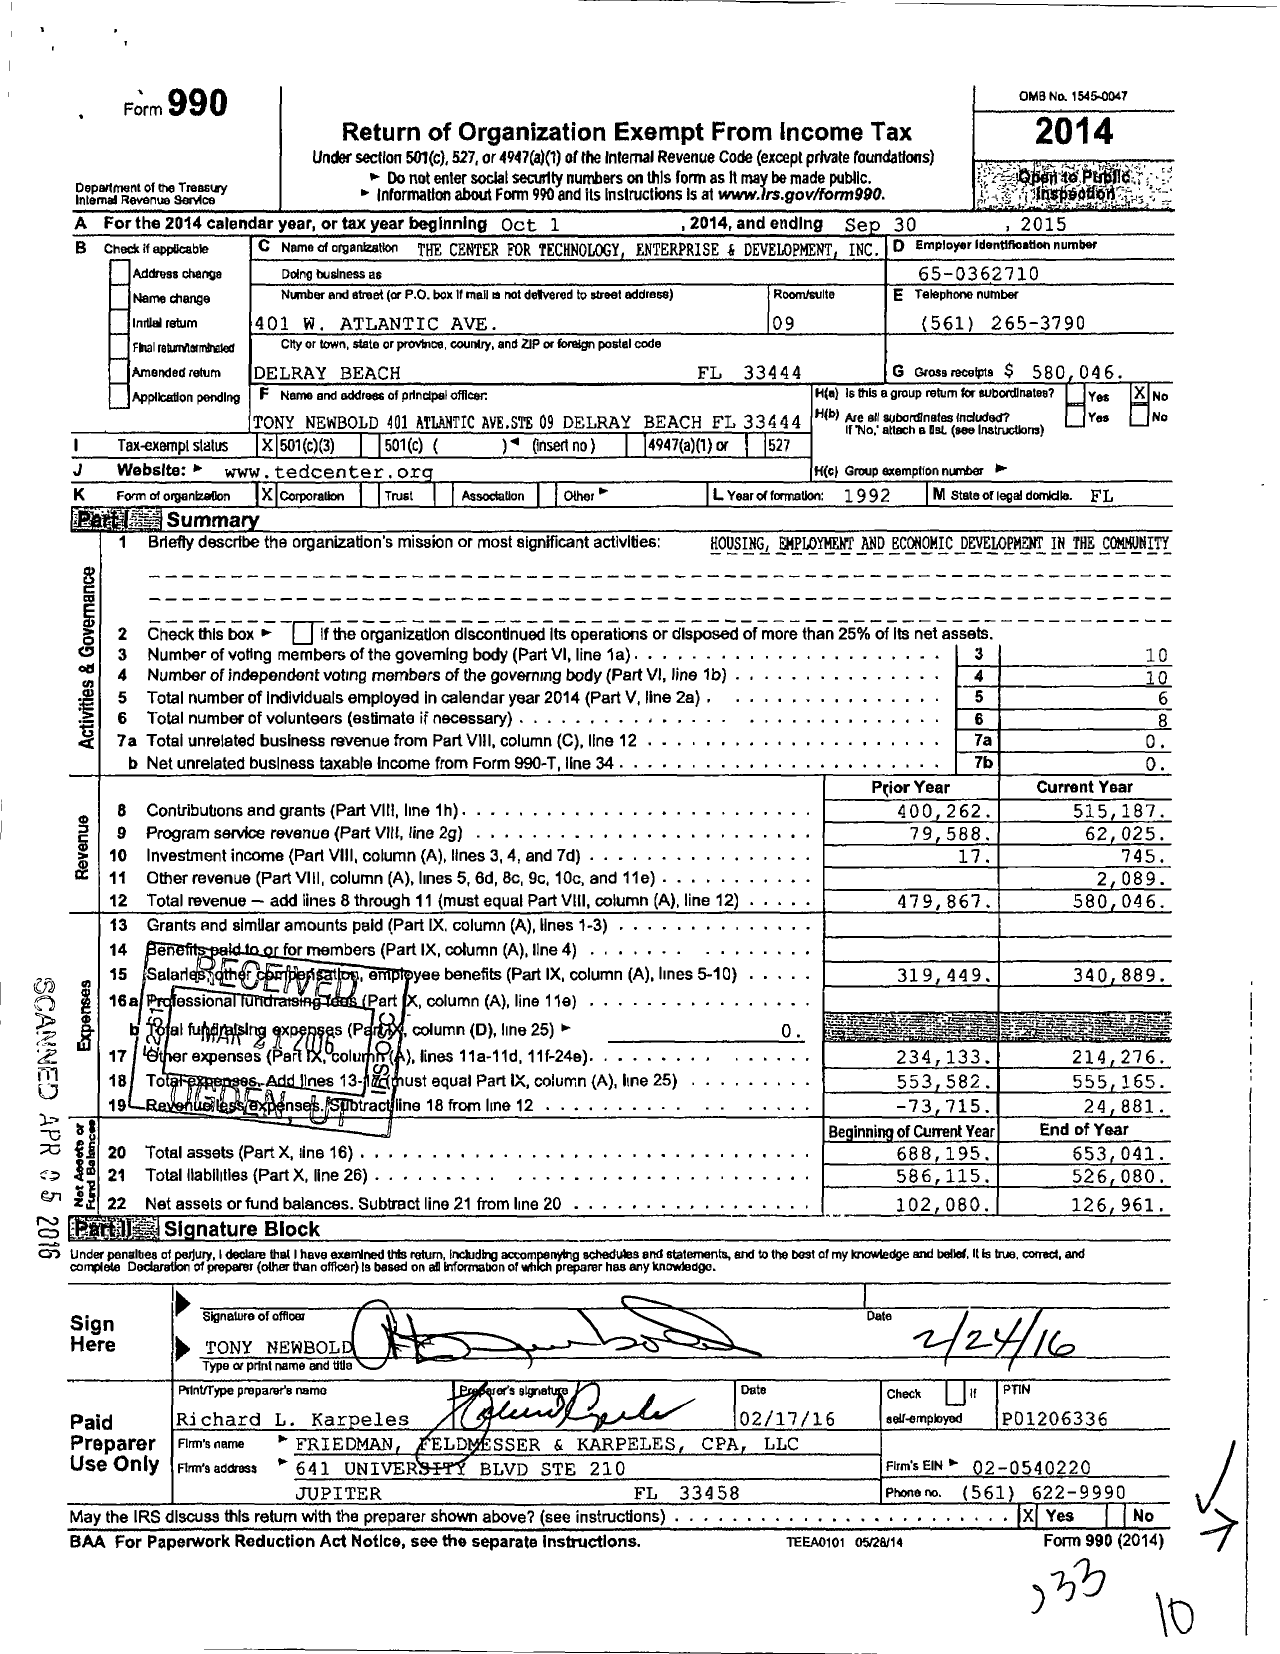 Image of first page of 2014 Form 990 for The Center for Technology Enterprise and Development